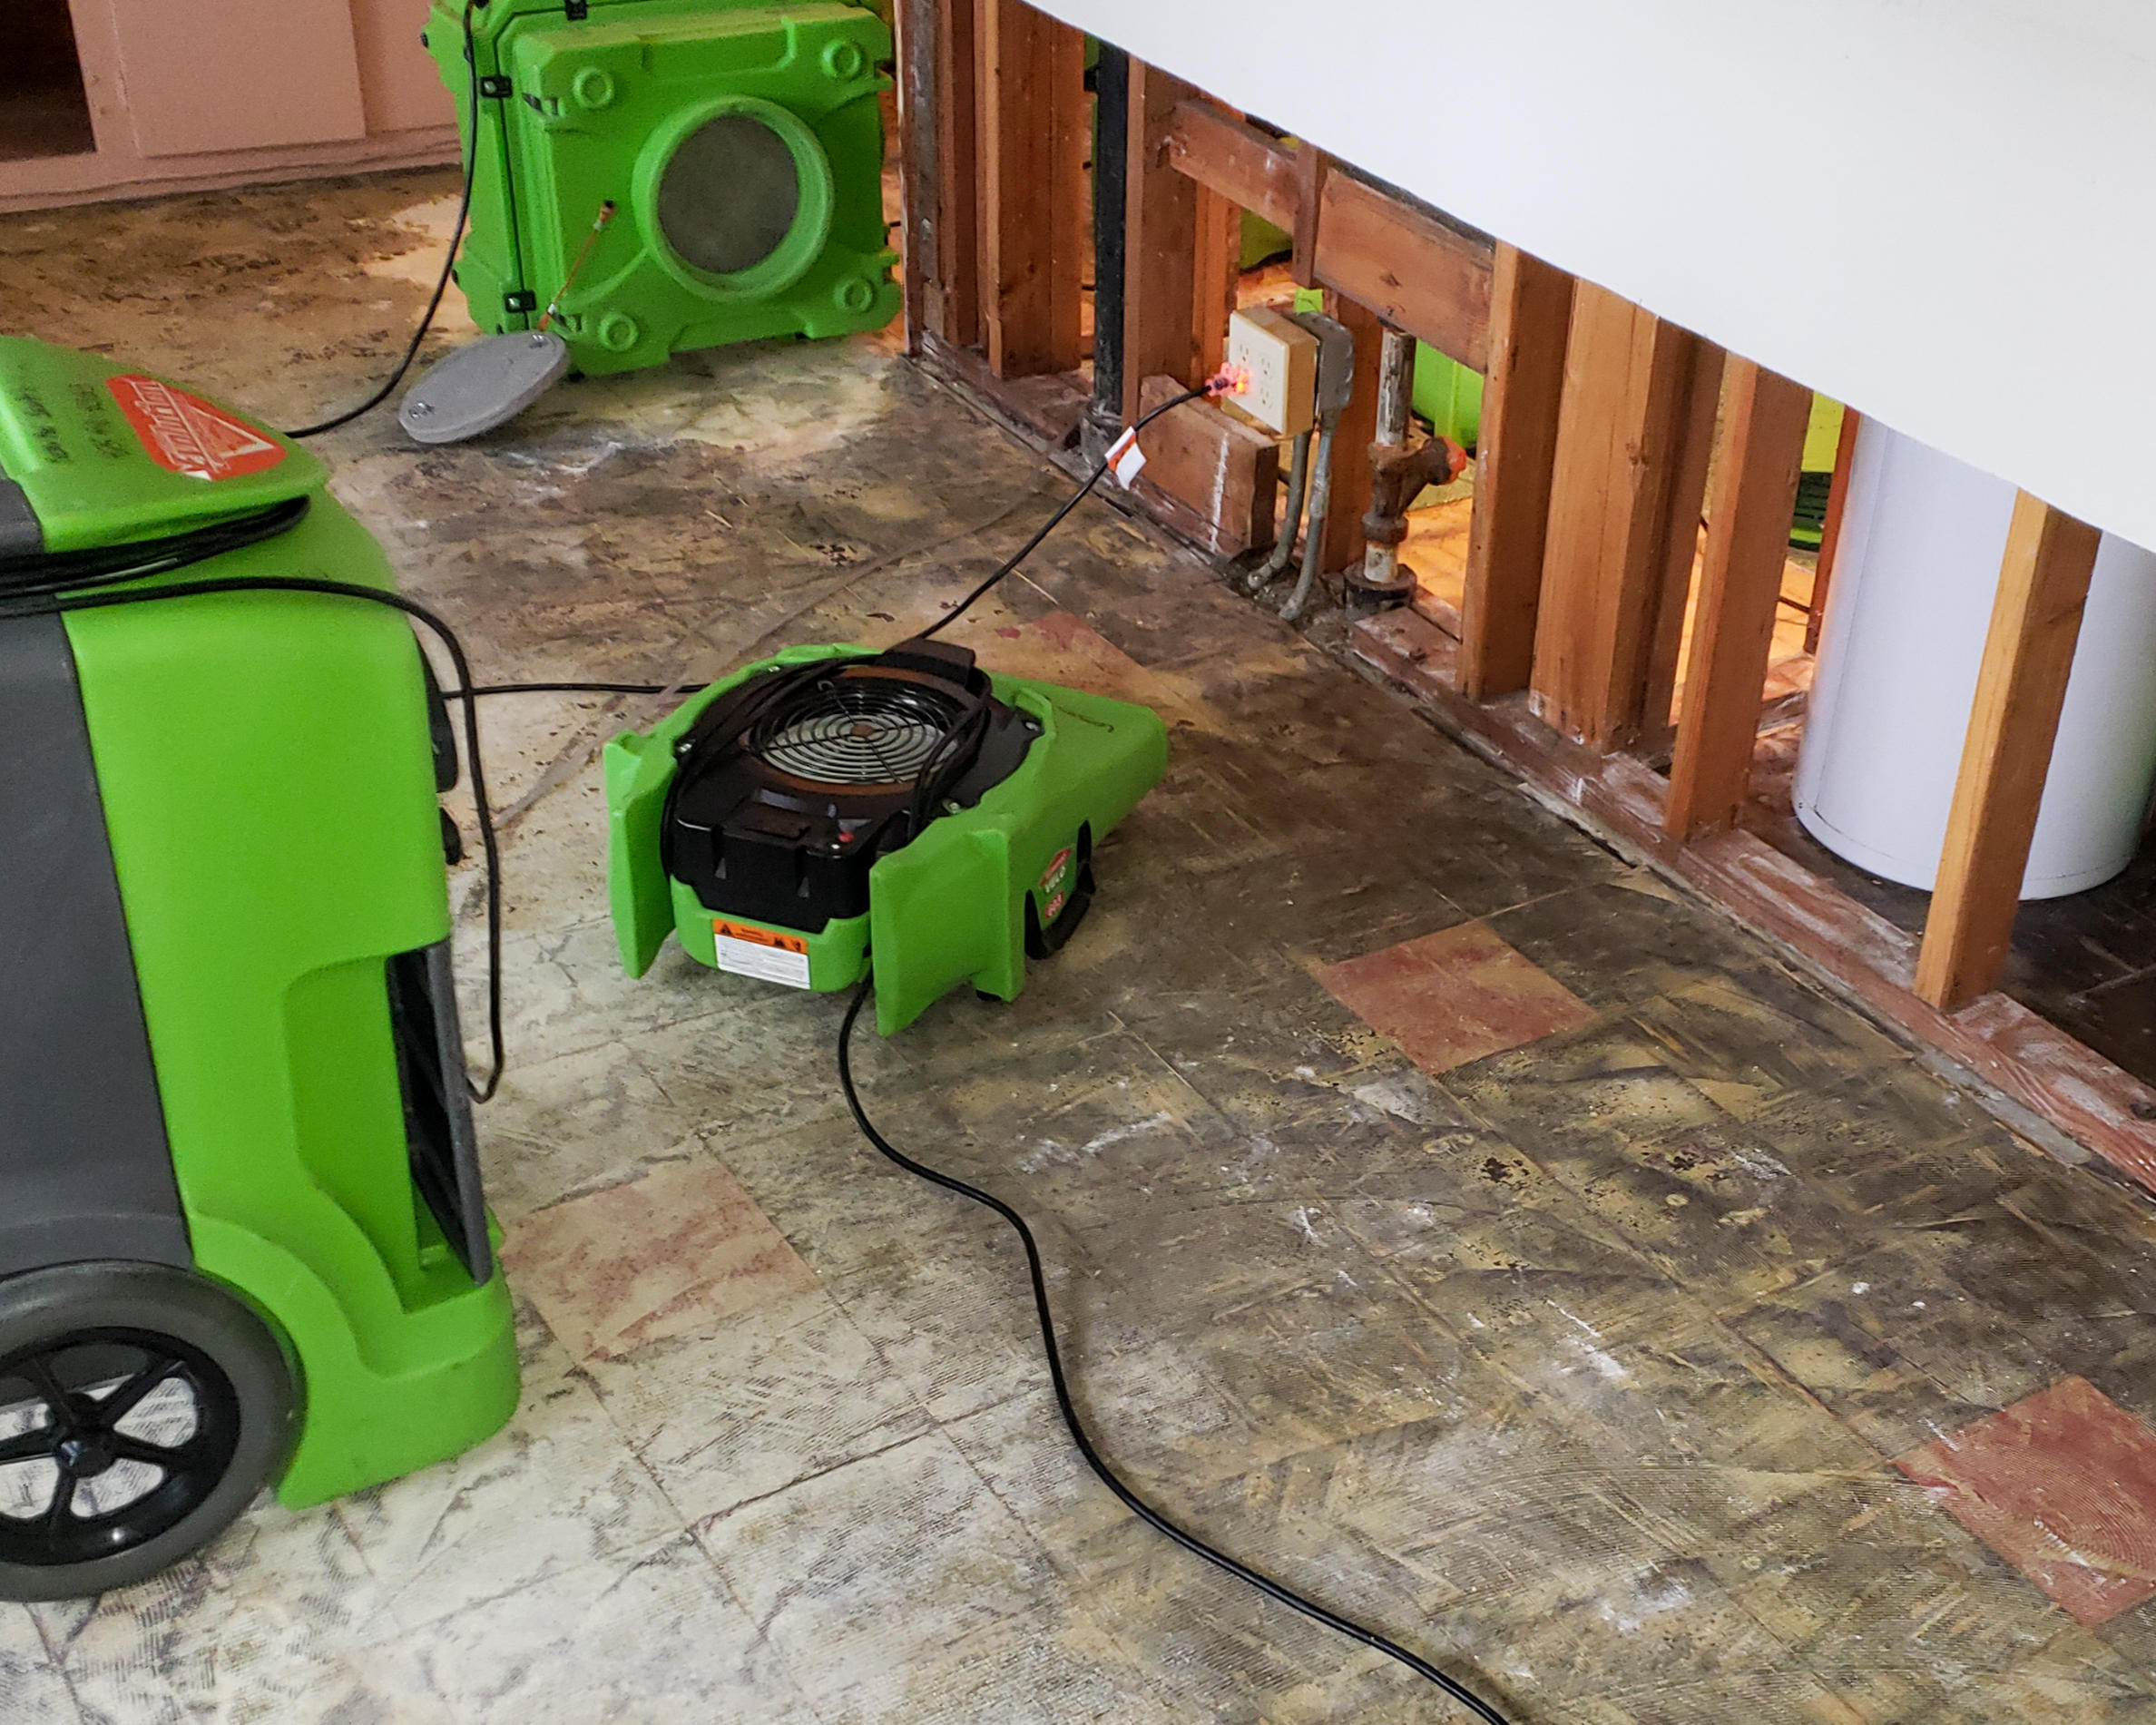 Our professionals deal with water damage restoration on a daily basis. The SERVPRO of Shoreline/Woodinvill crew is available to you 24 hours a day, 7 days a week, 365 days a year. Please give us a call!